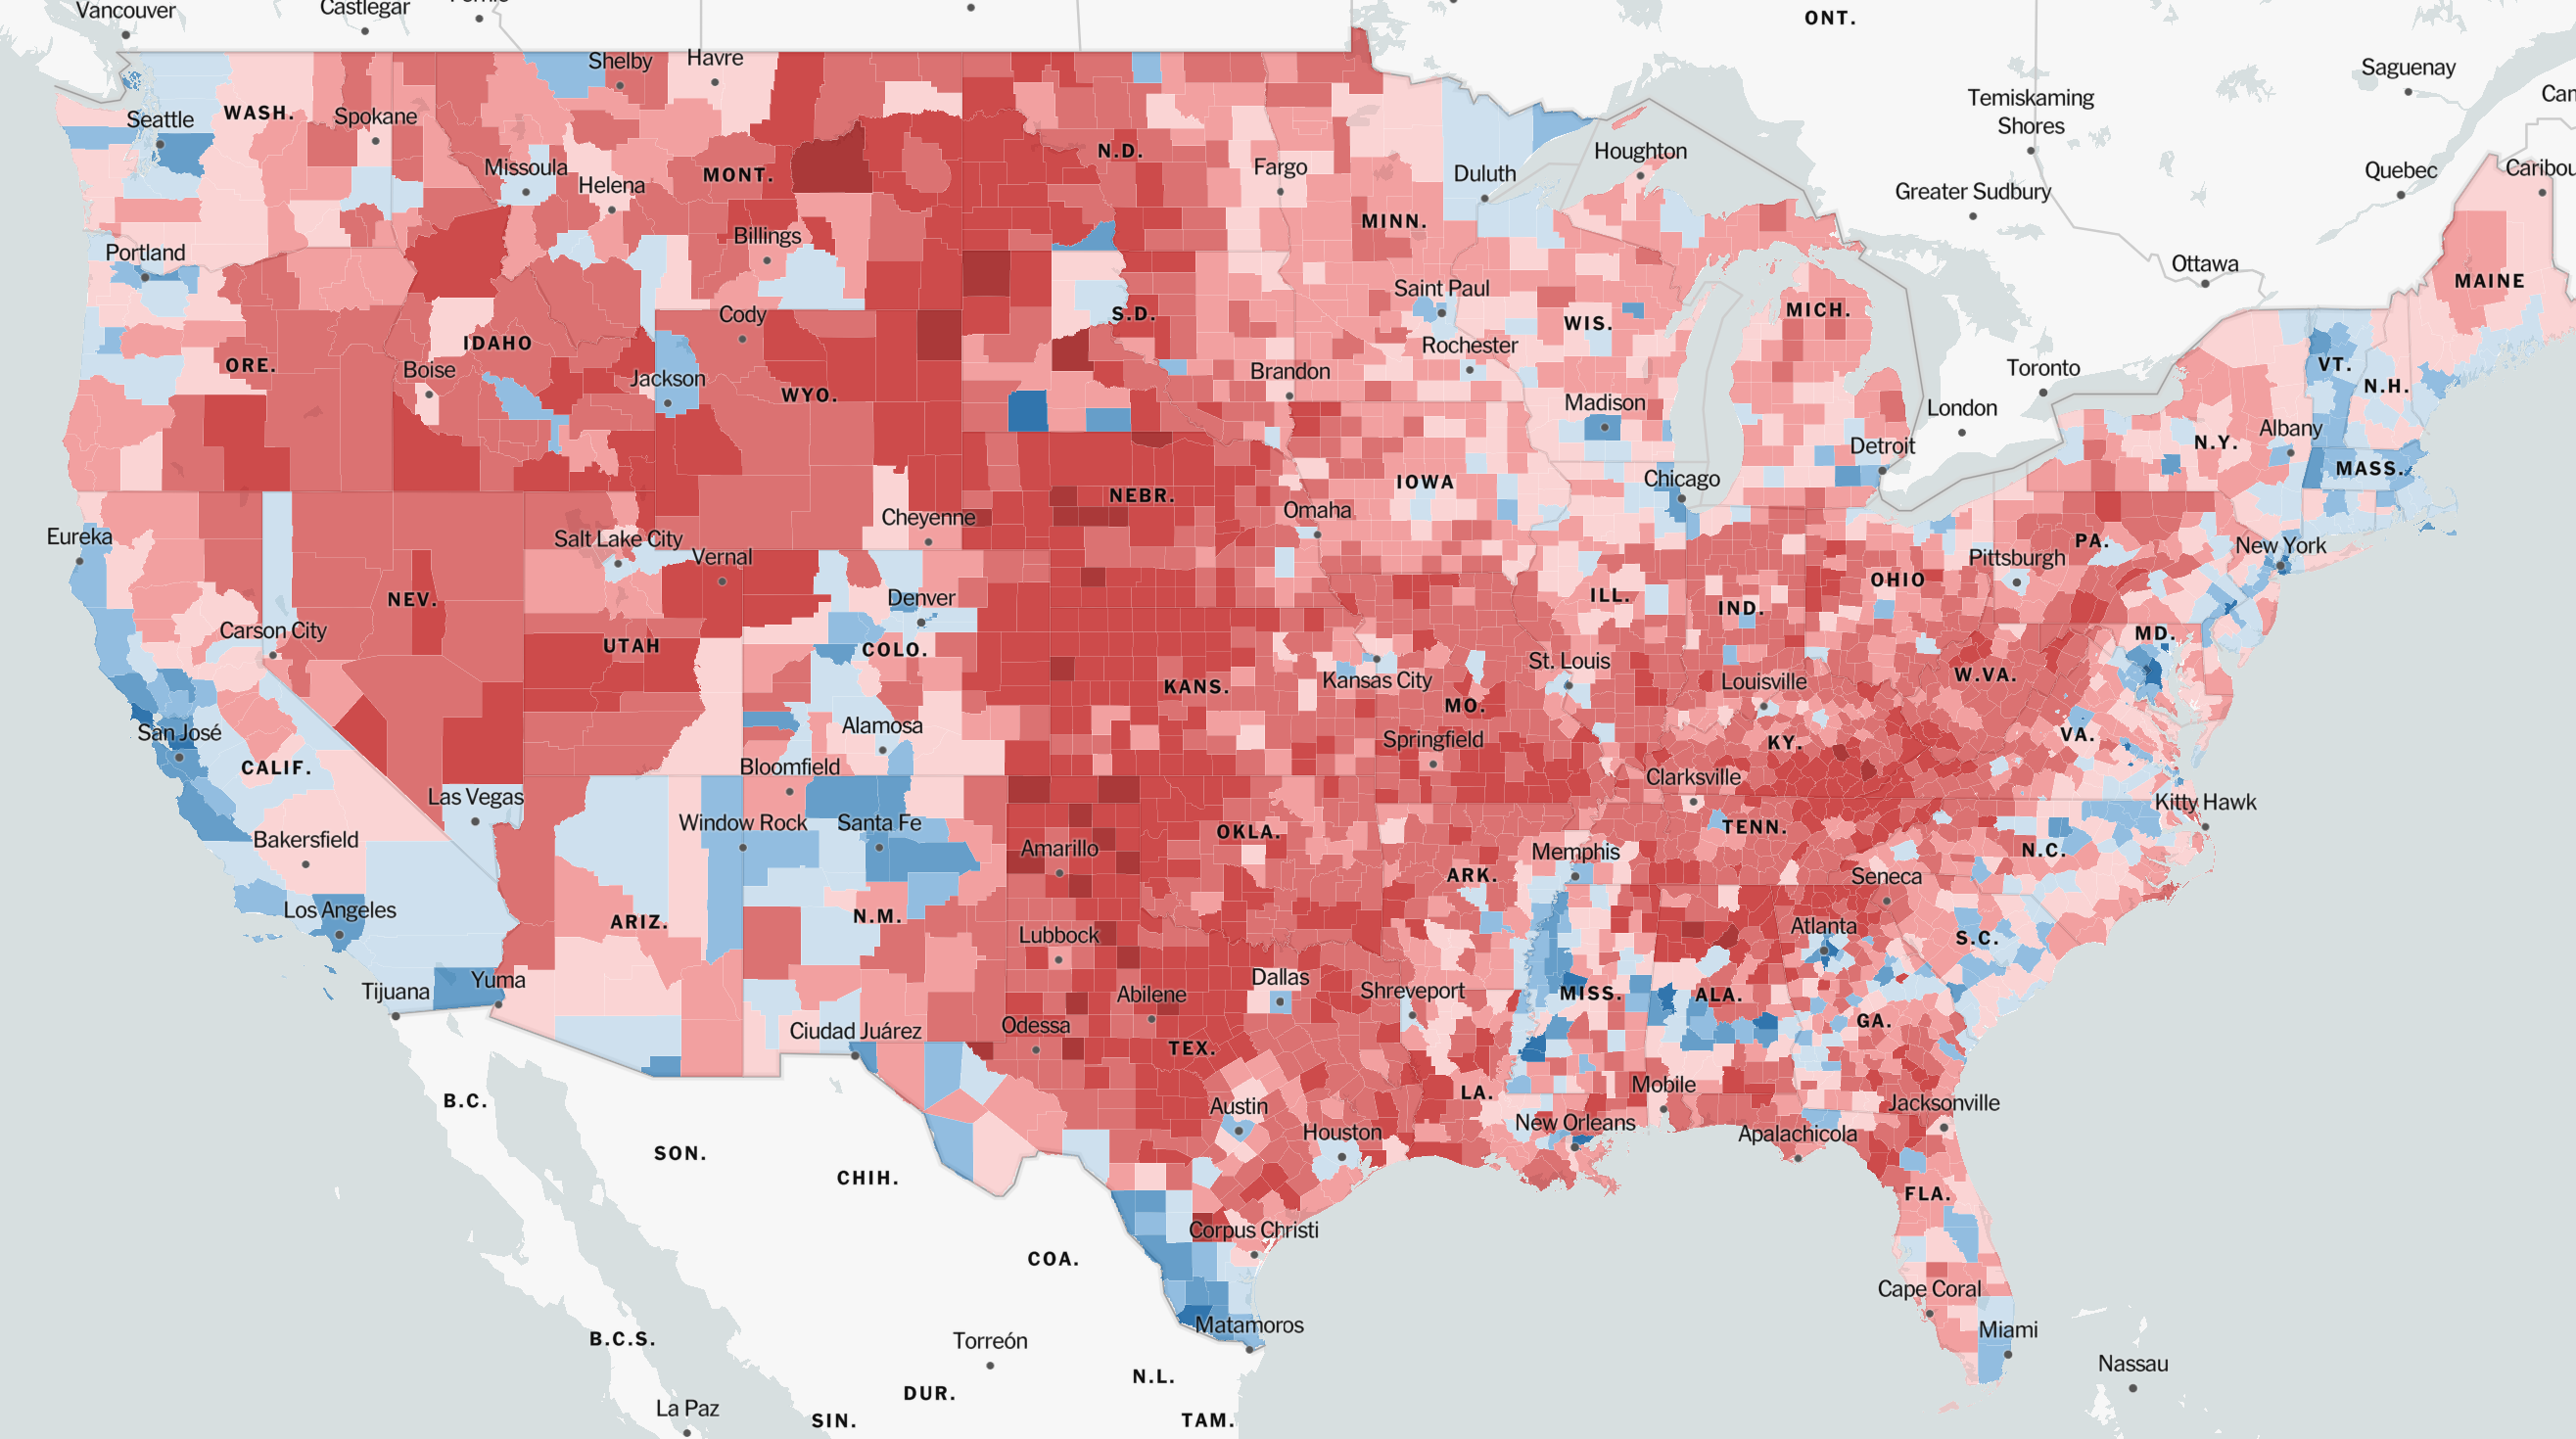 Map of US election results in 2016, using shades to visualize population density